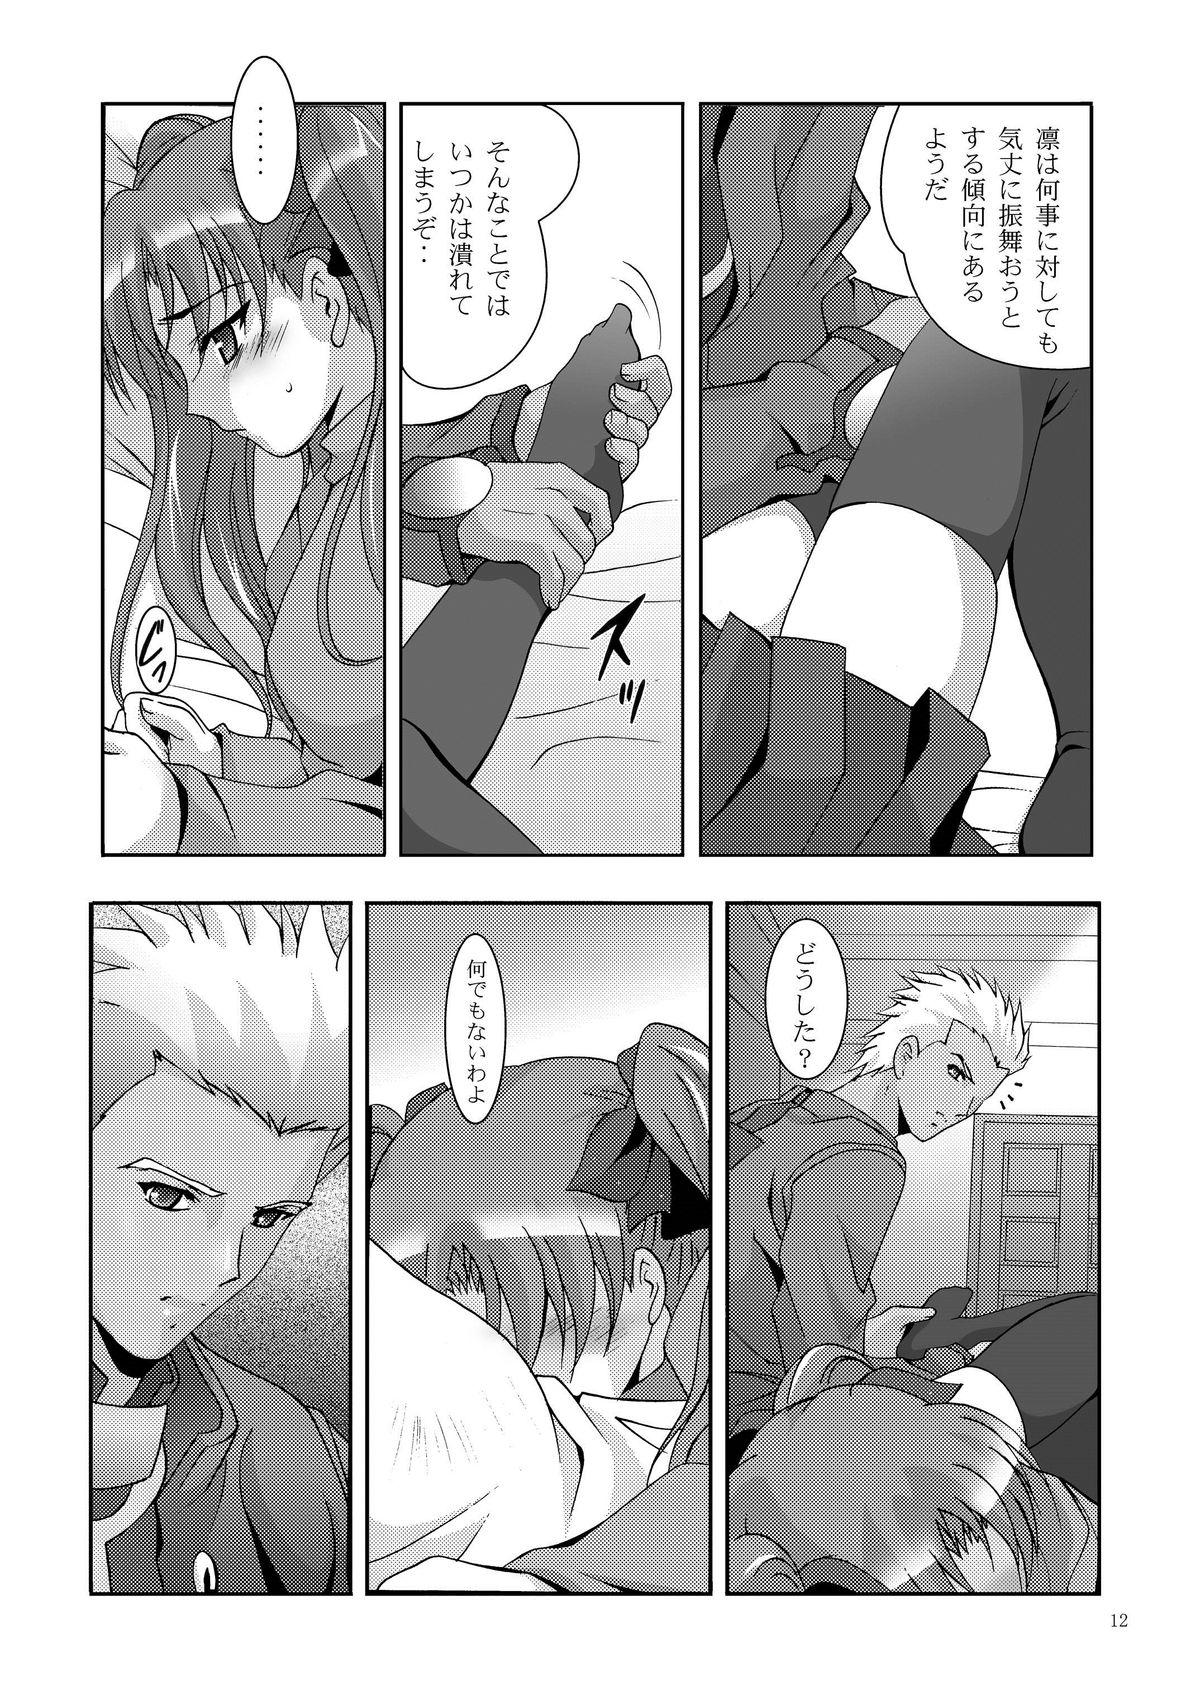 Metendo MOUSOU THEATER 19 - Fate stay night Step Dad - Page 12